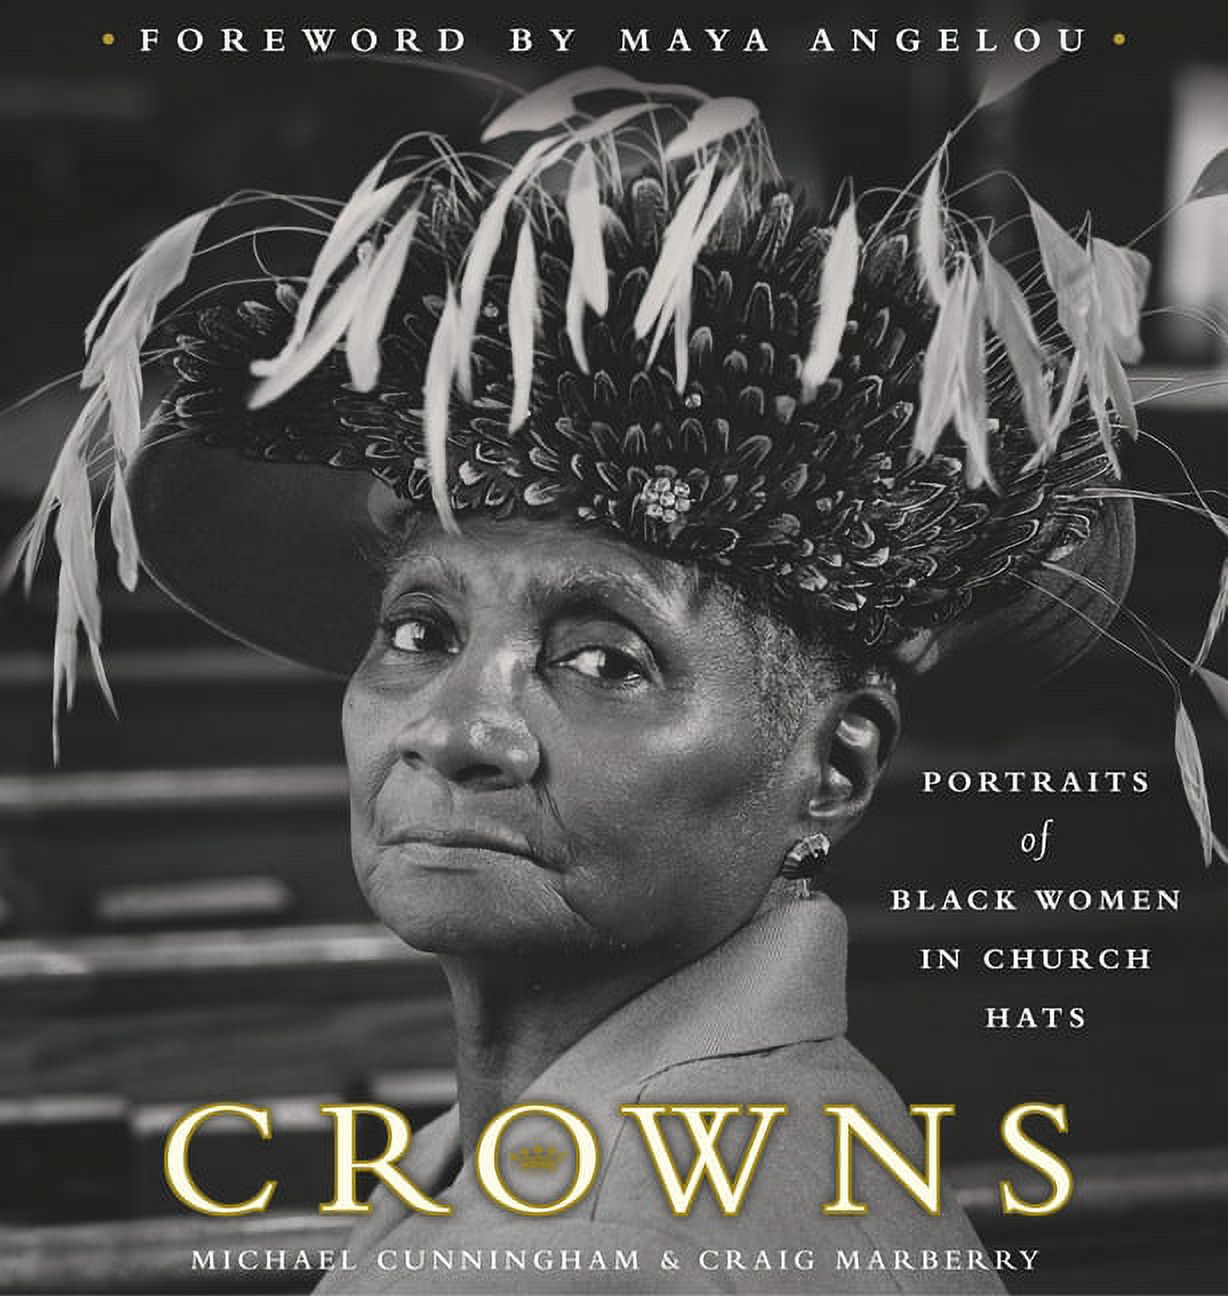 Crowns : Portraits of Black Women in Church Hats (Hardcover) - image 1 of 1